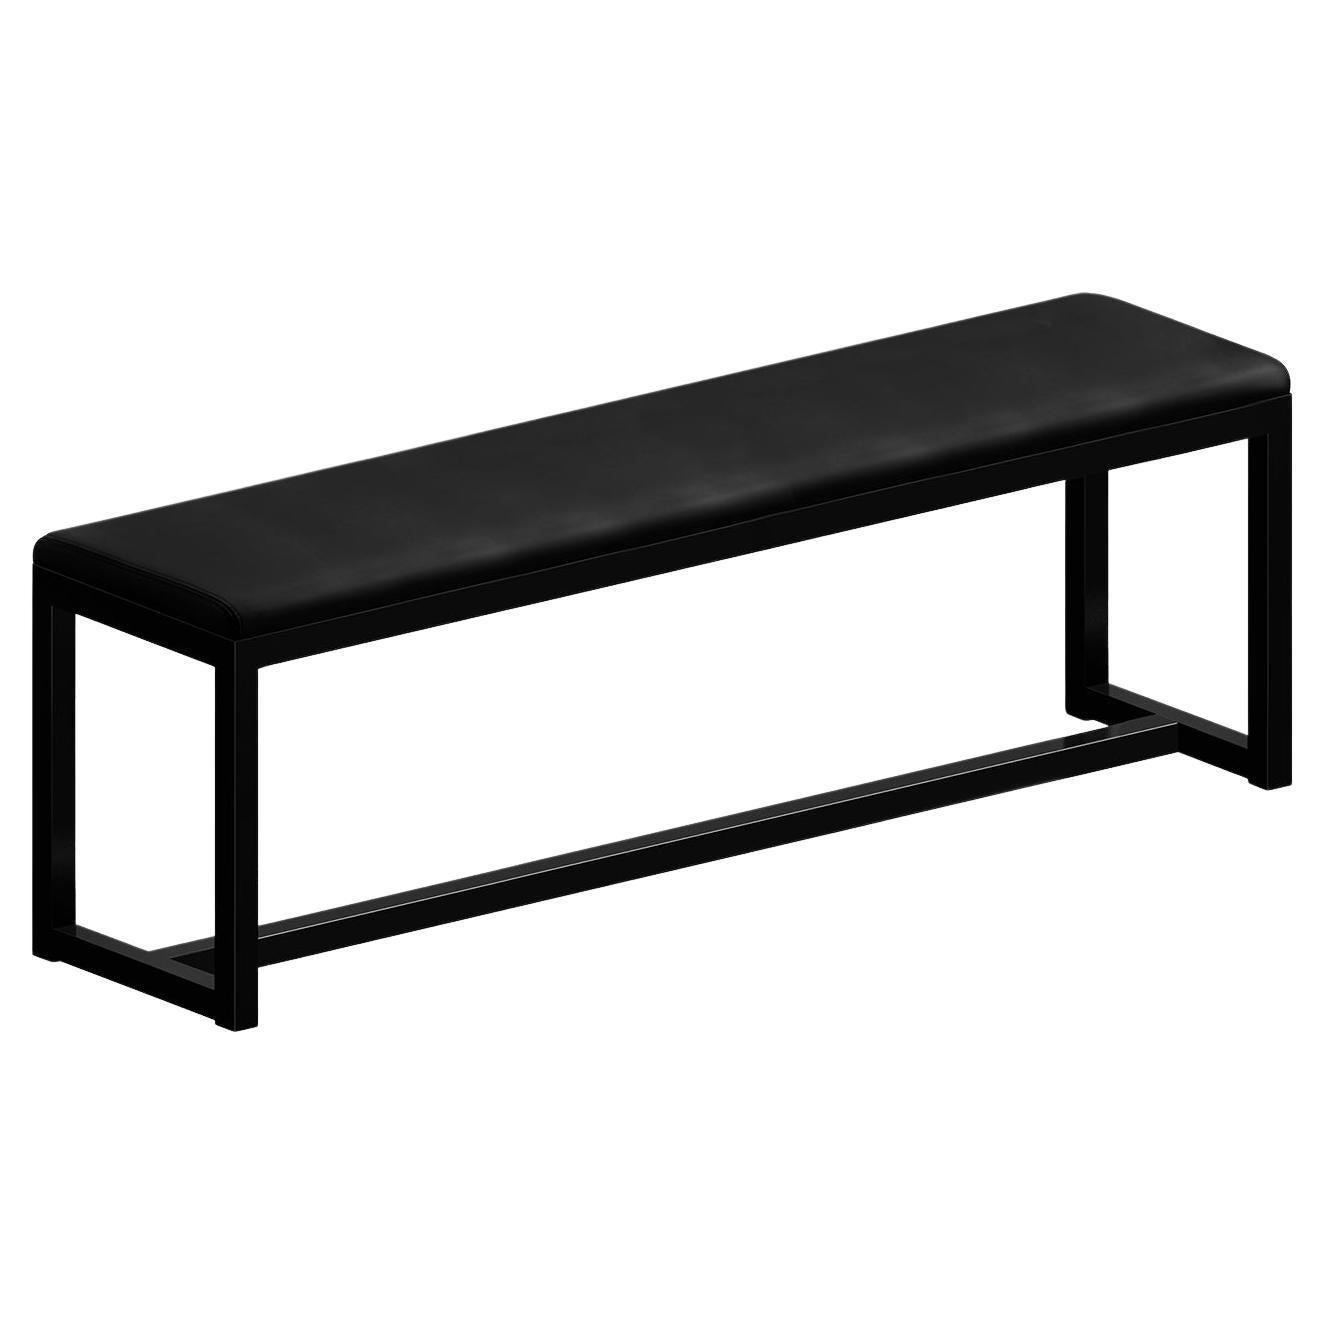 Big Brother Small Black Bench by Maurizio Peregalli For Sale